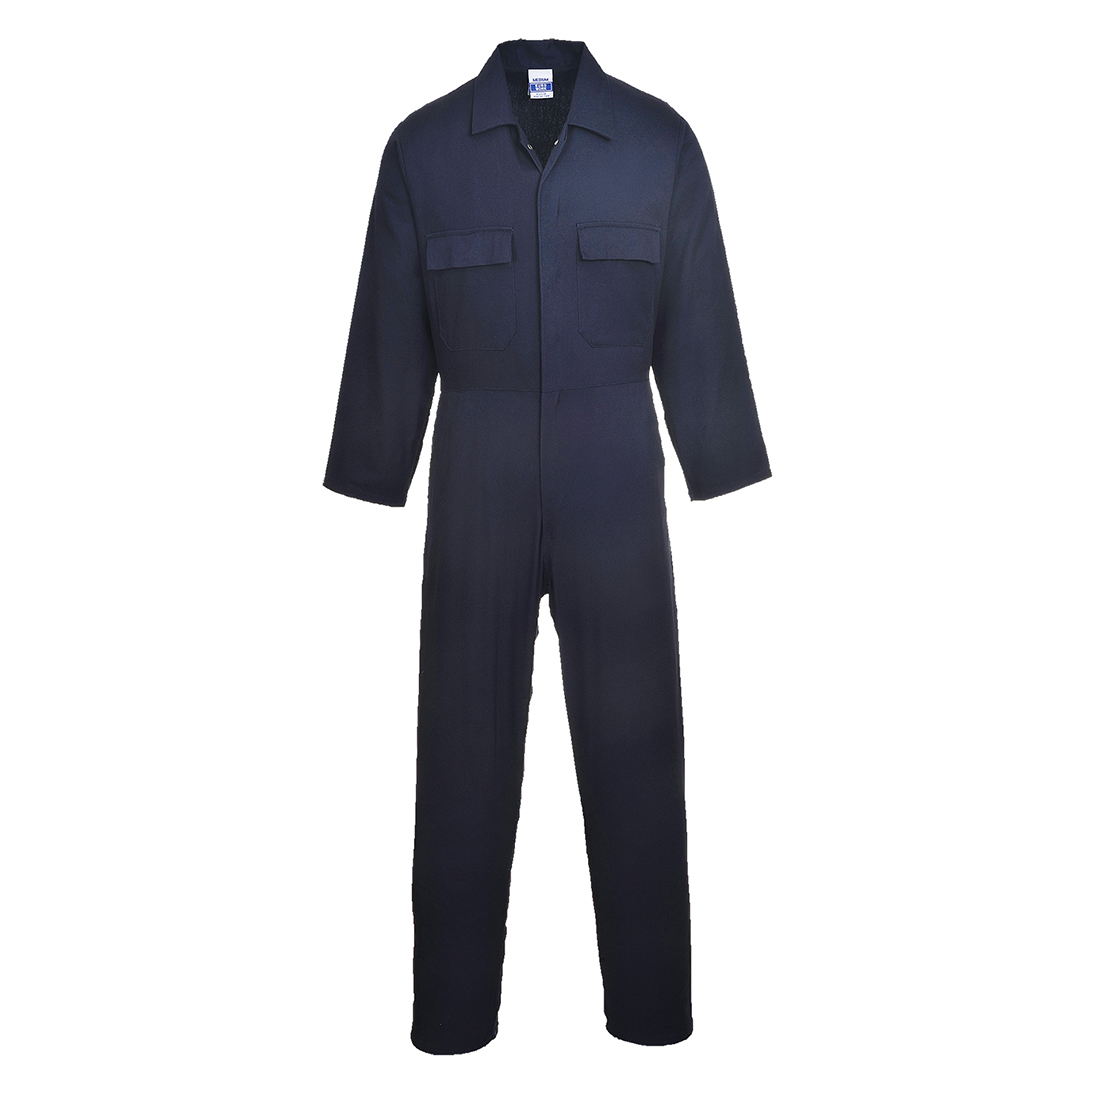  Popular Classic Strong Windproof Work Cotton Winter Coverall 